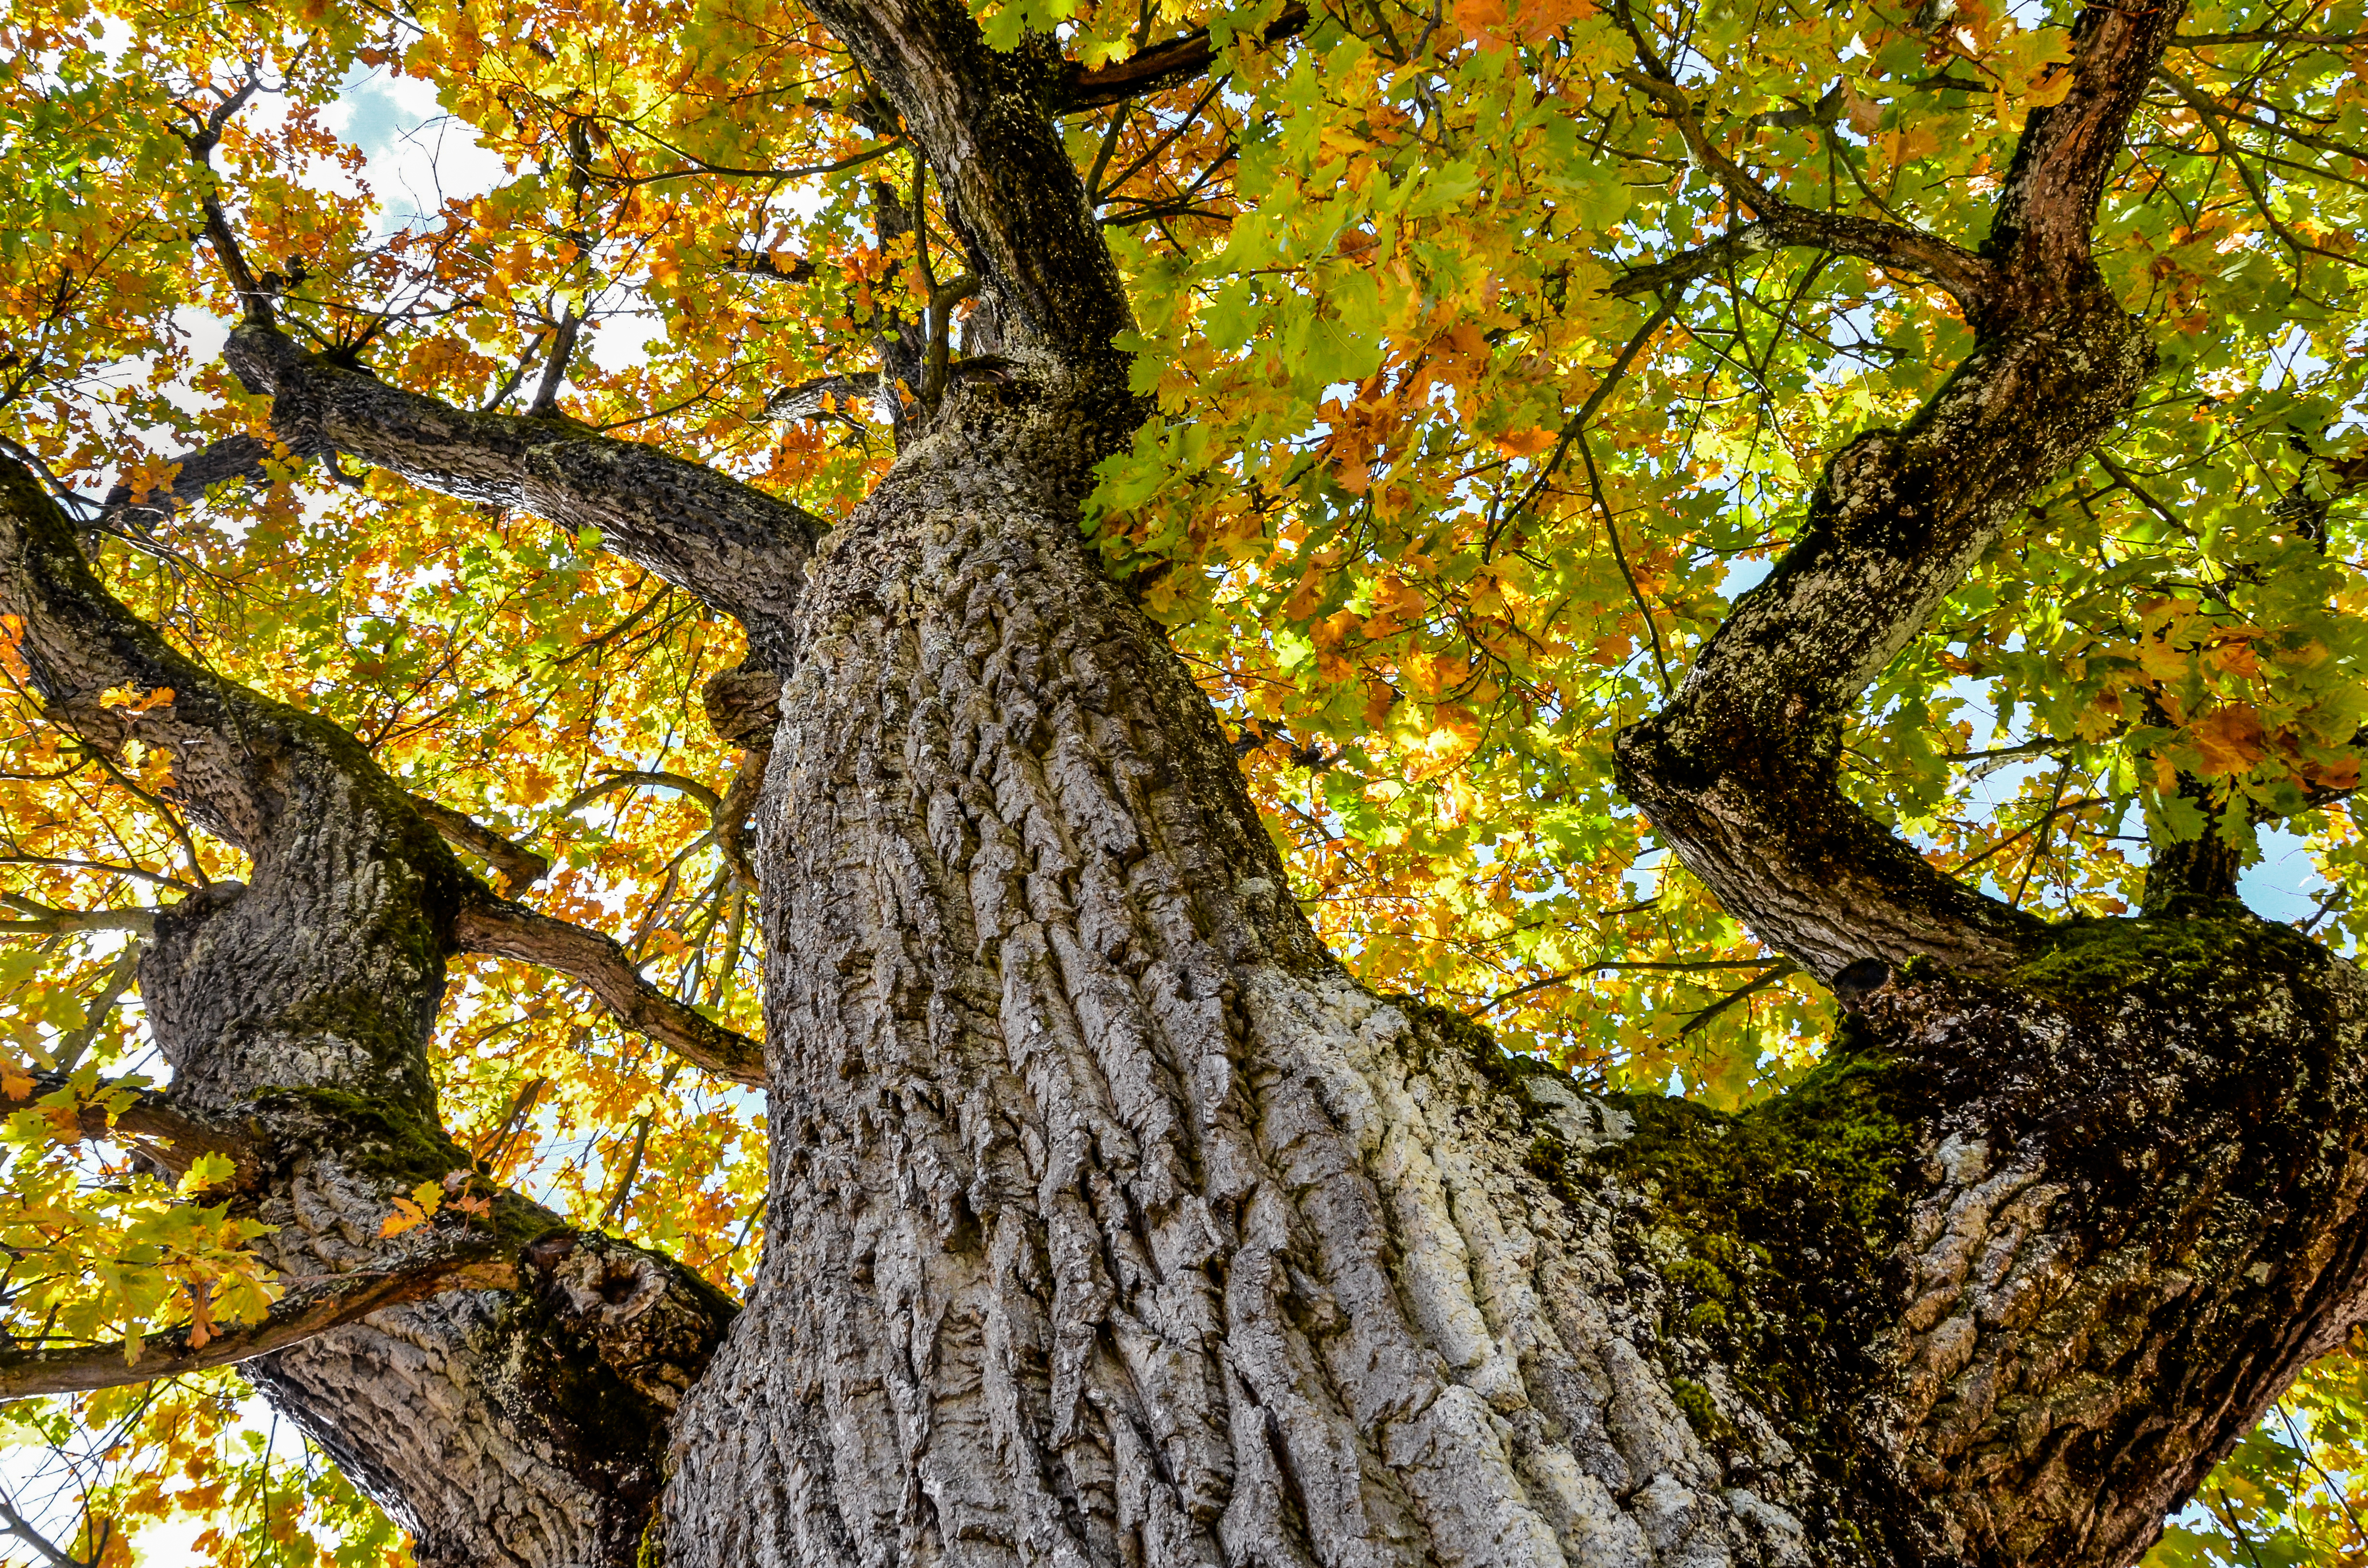 Picture looking up towards the top of a tree with yellow and green leaves.